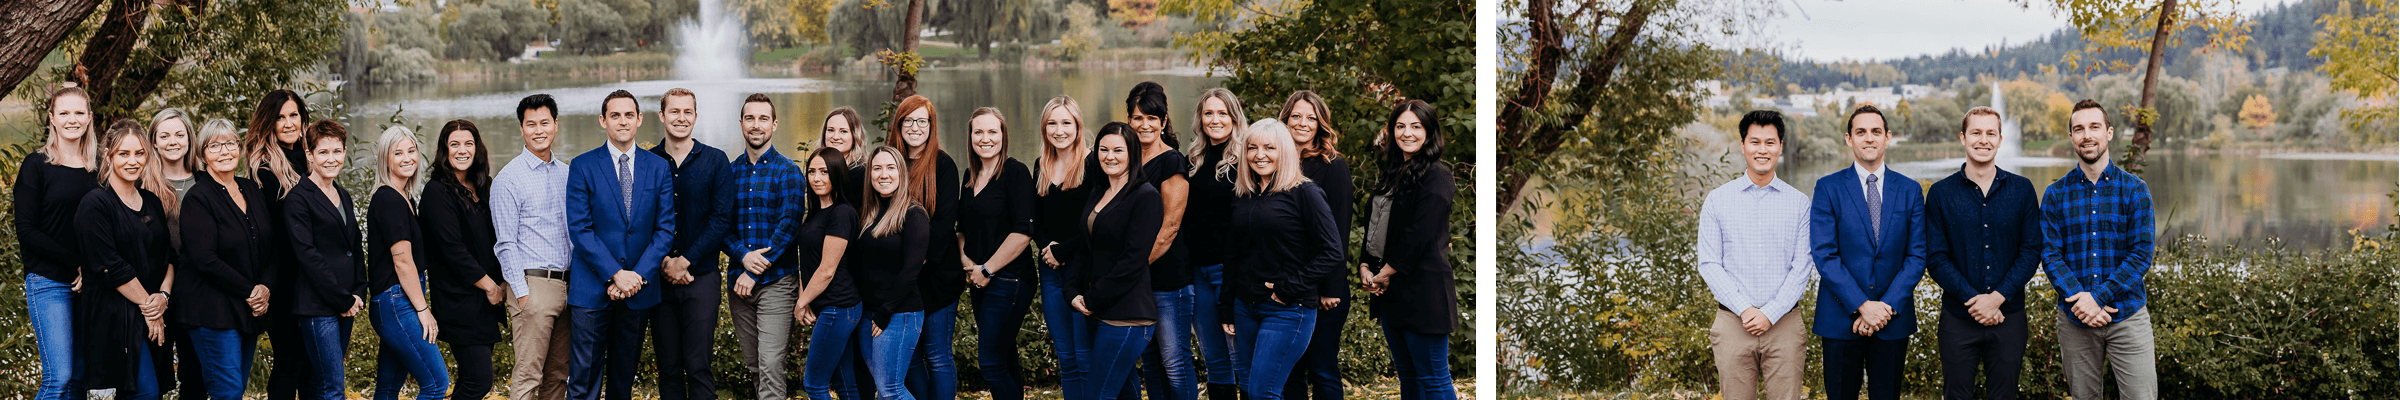 Photos of Salmon Arm Dental Group staff and office